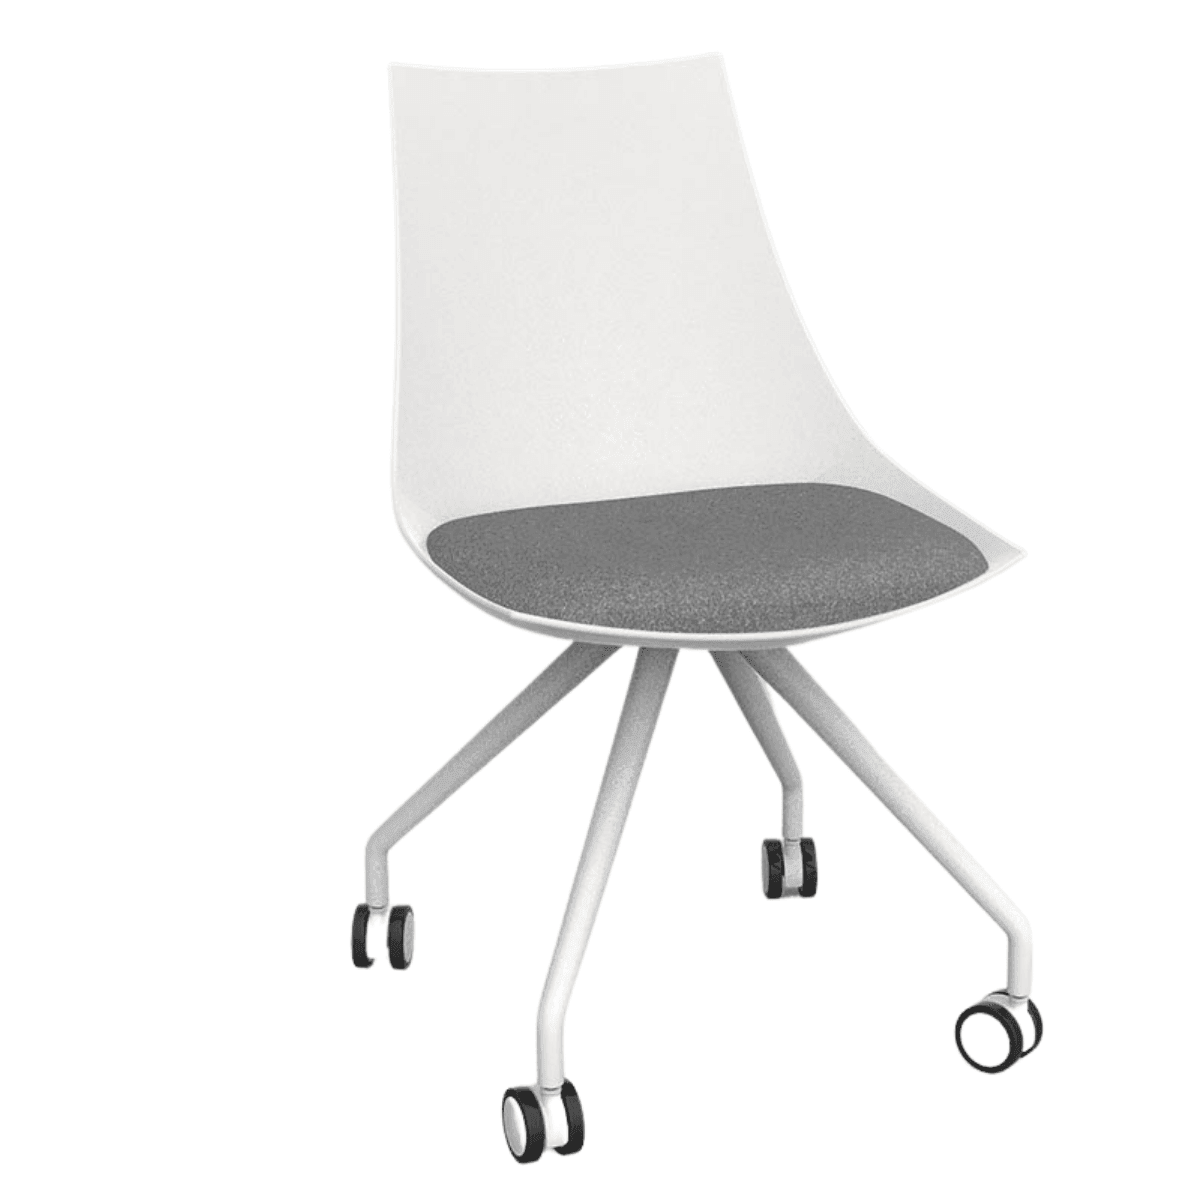 Luna White Chair with Castor Base - Office Furniture Company 